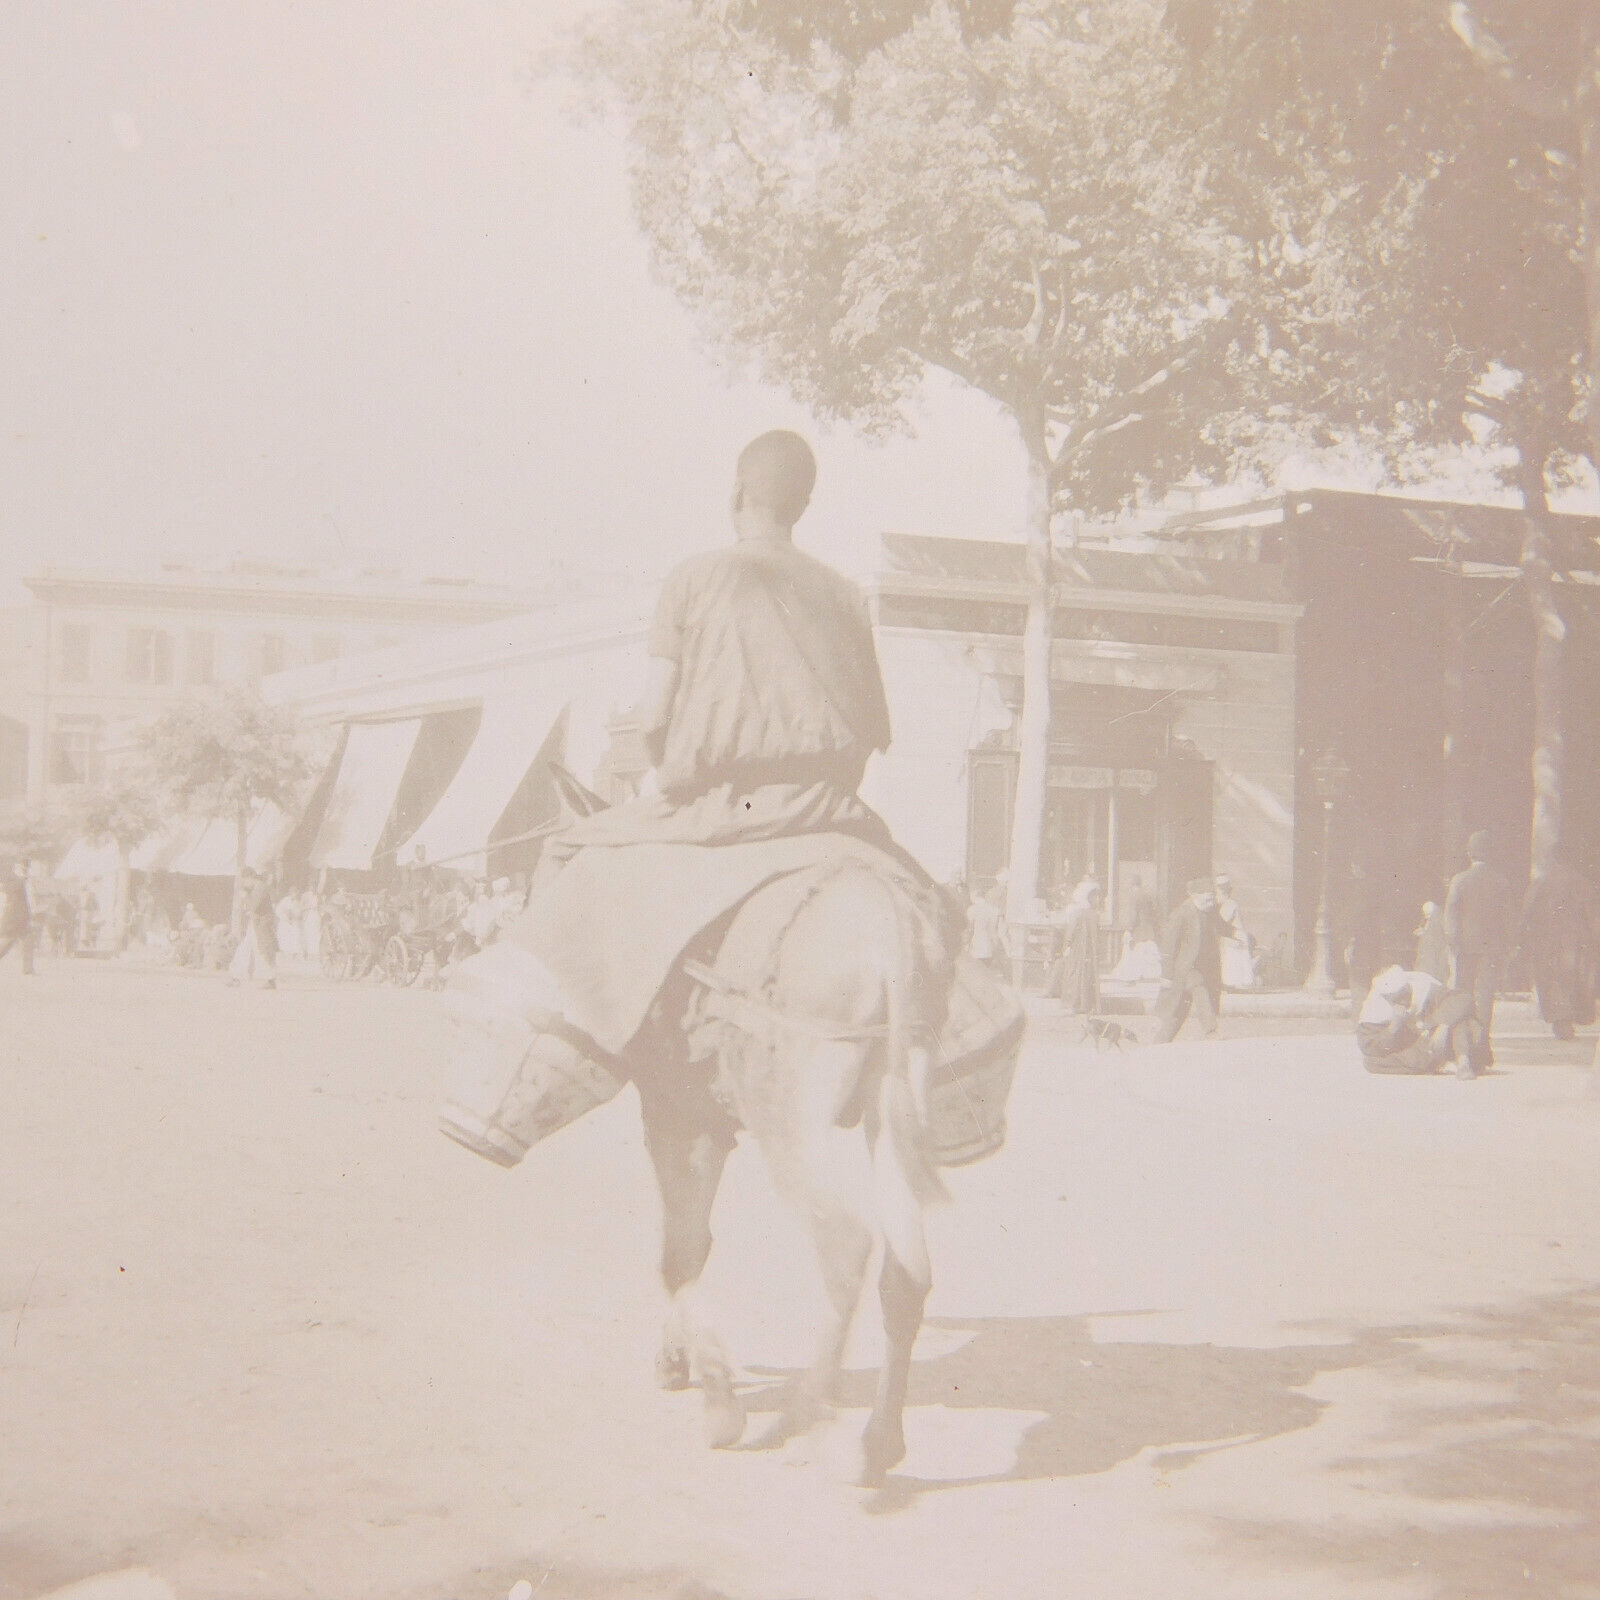 c.1900s Glass Plate Image Man riding Horse  Cairo Egypt 3-1/4x4